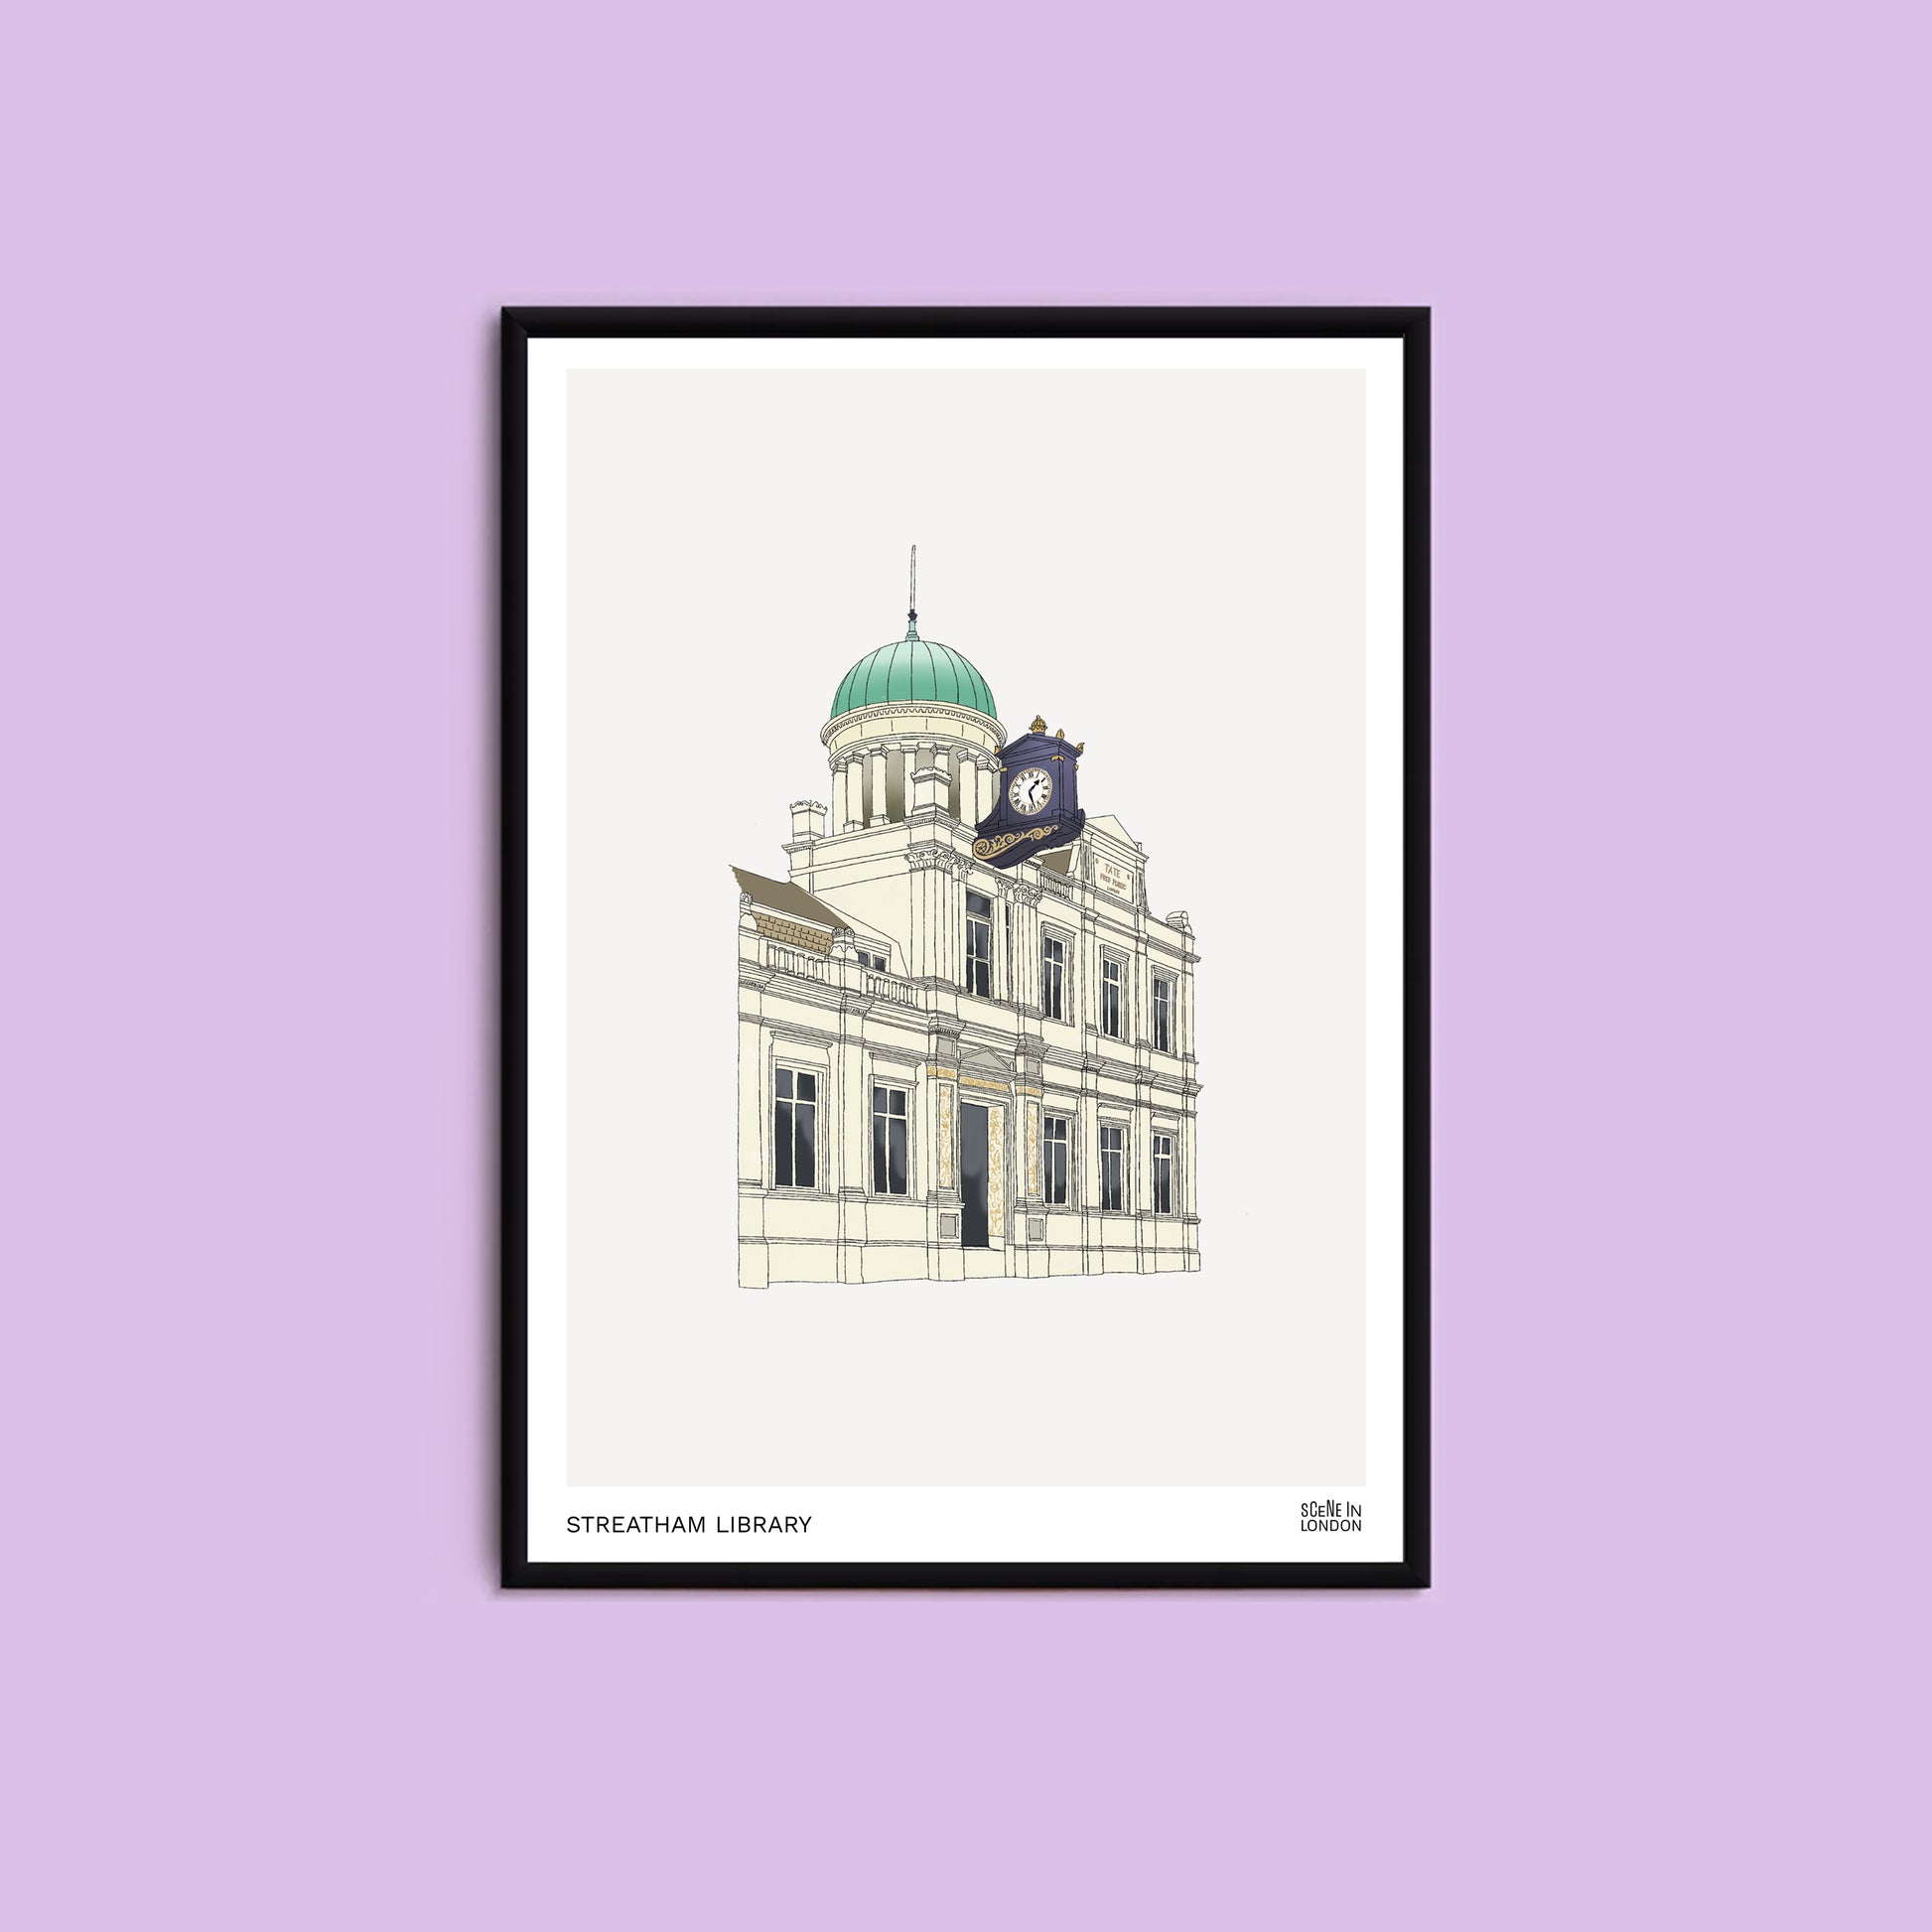 Art print of Streatham Library in London